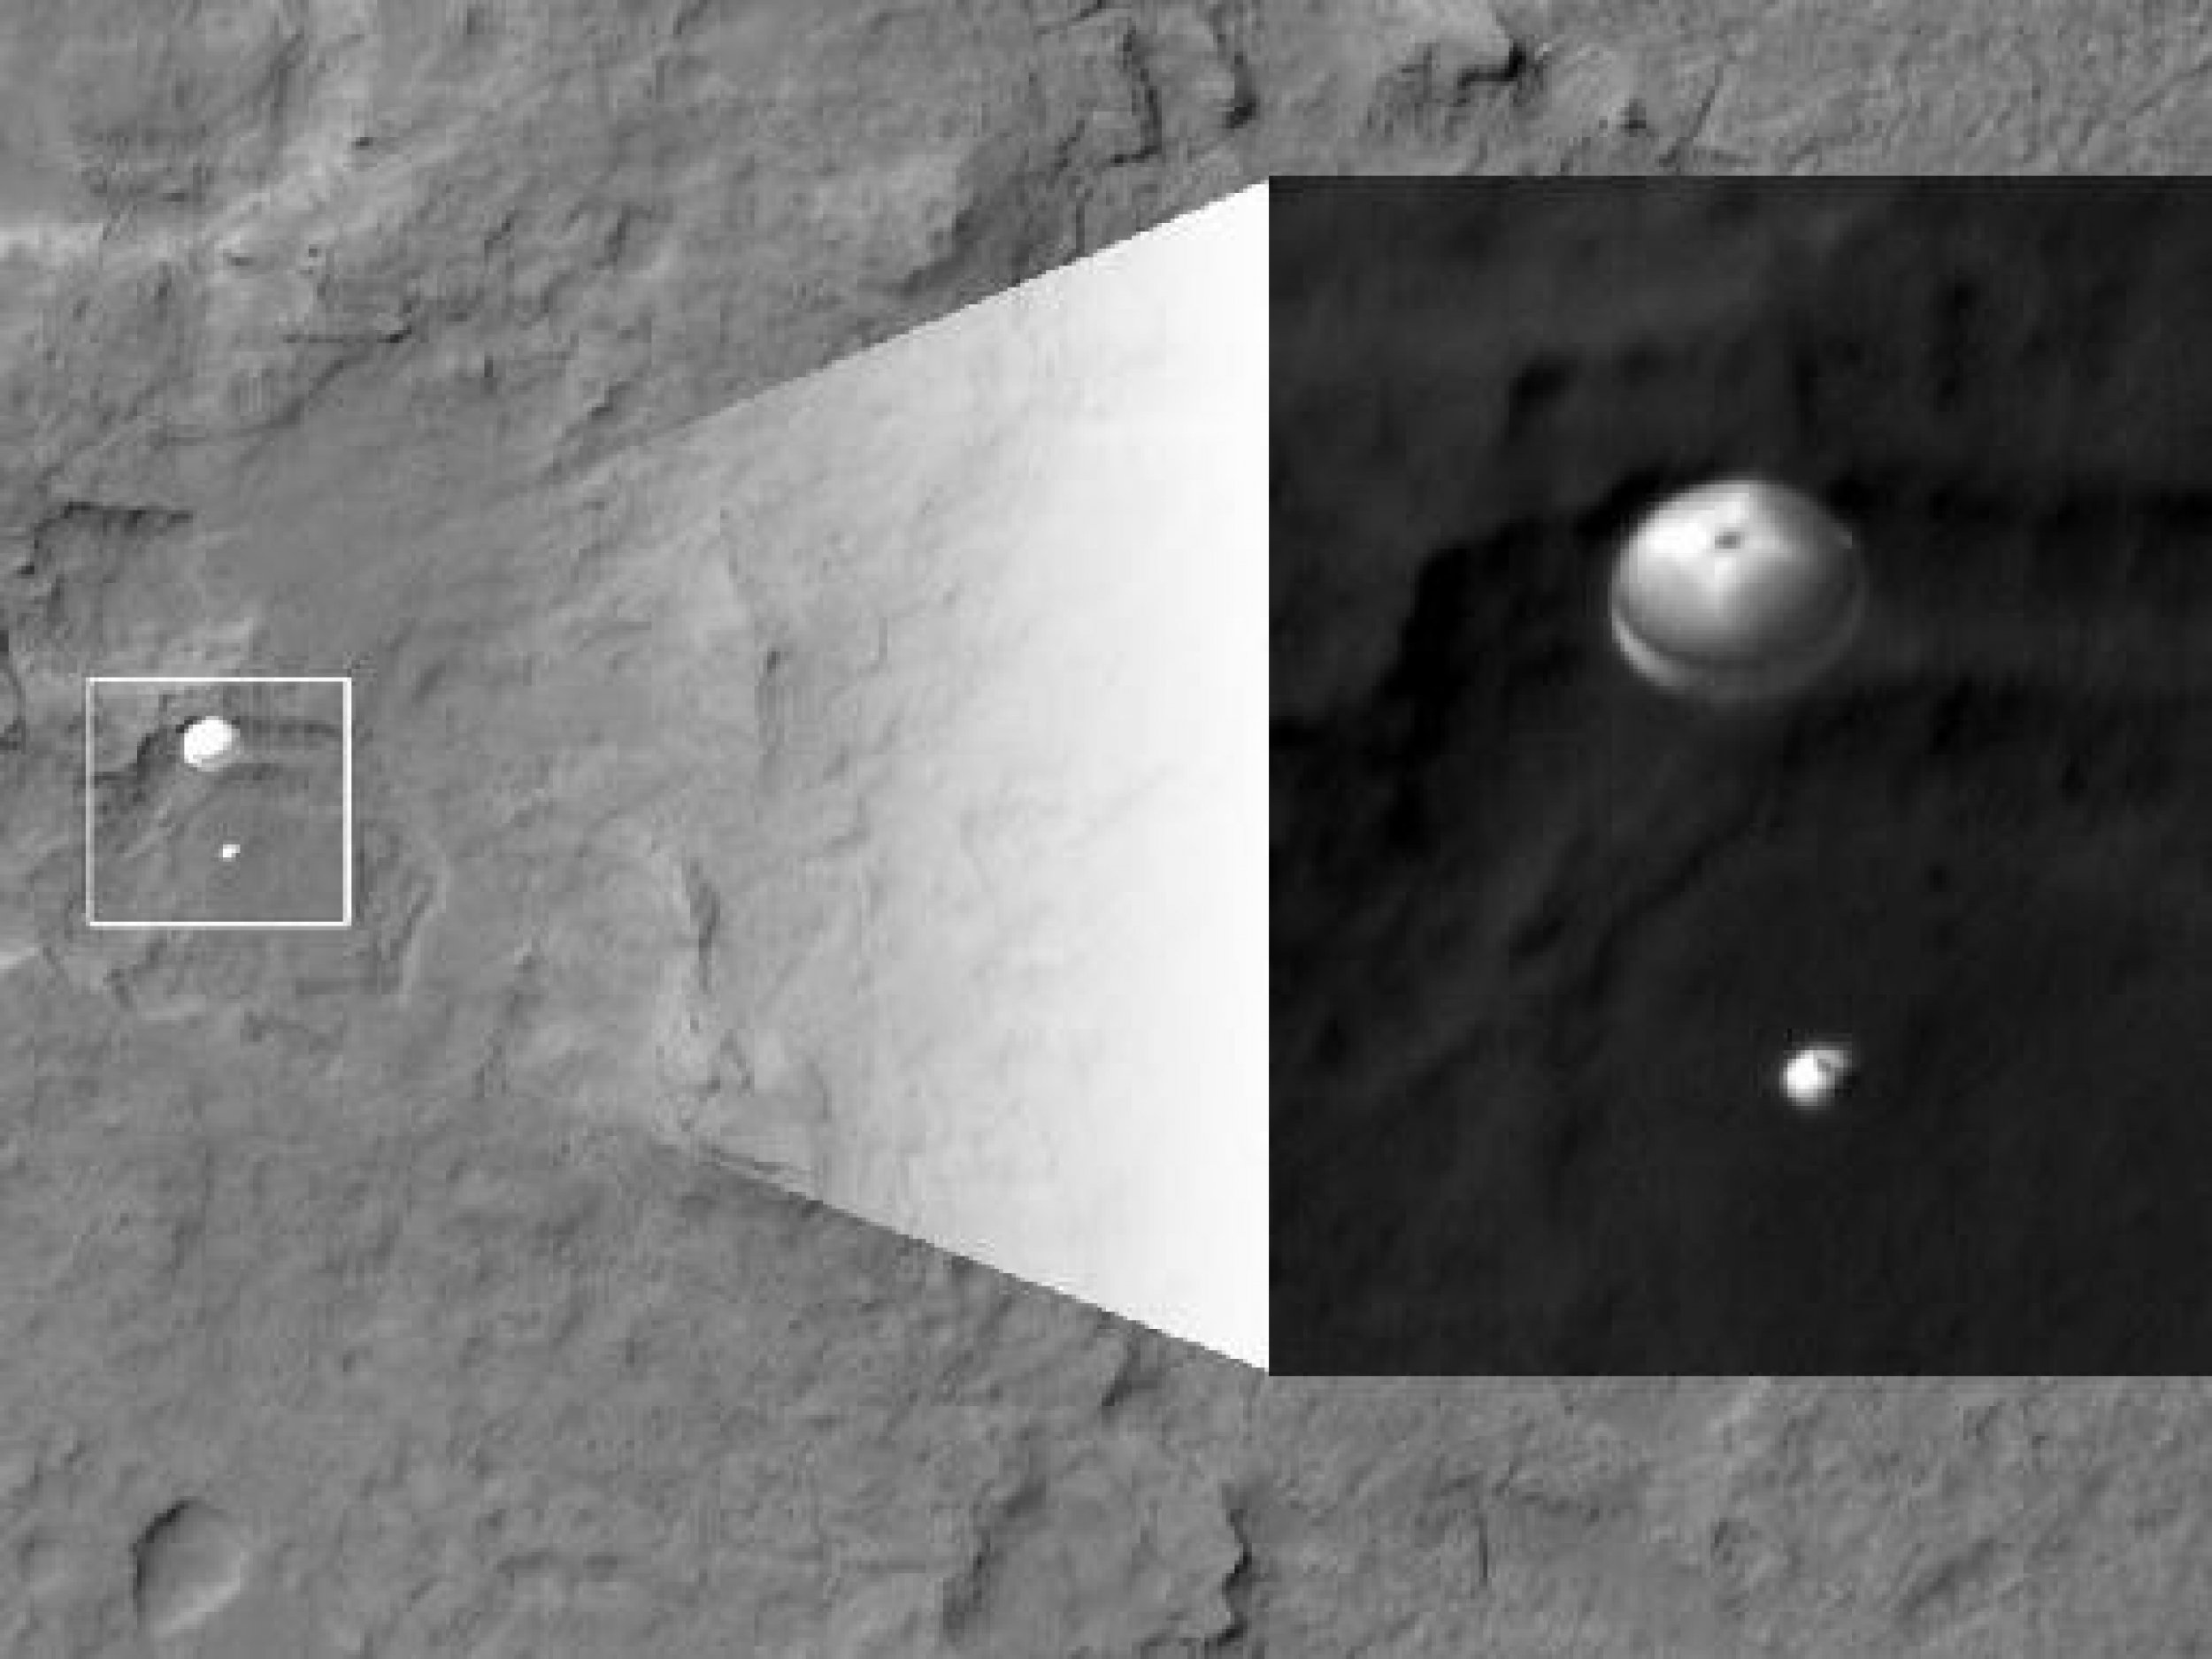 Watch The Landing Of NASAs Mars Rover Curiosity VIDEO, PICTURES